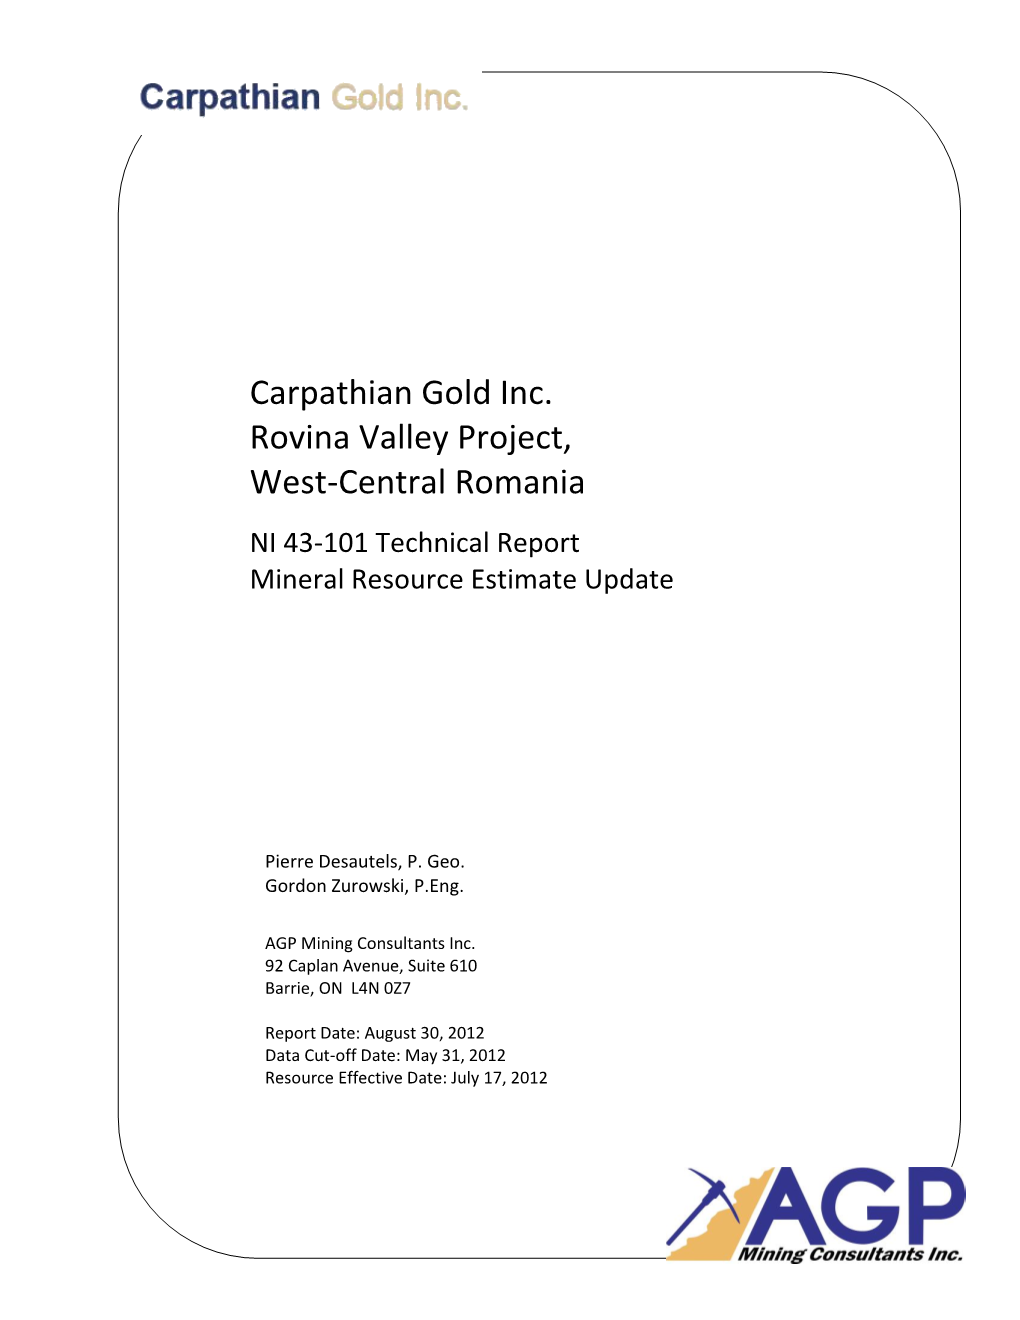 Carpathian Gold Inc. Rovina Valley Project, West-Central Romania NI 43-101 Technical Report Mineral Resource Estimate Update